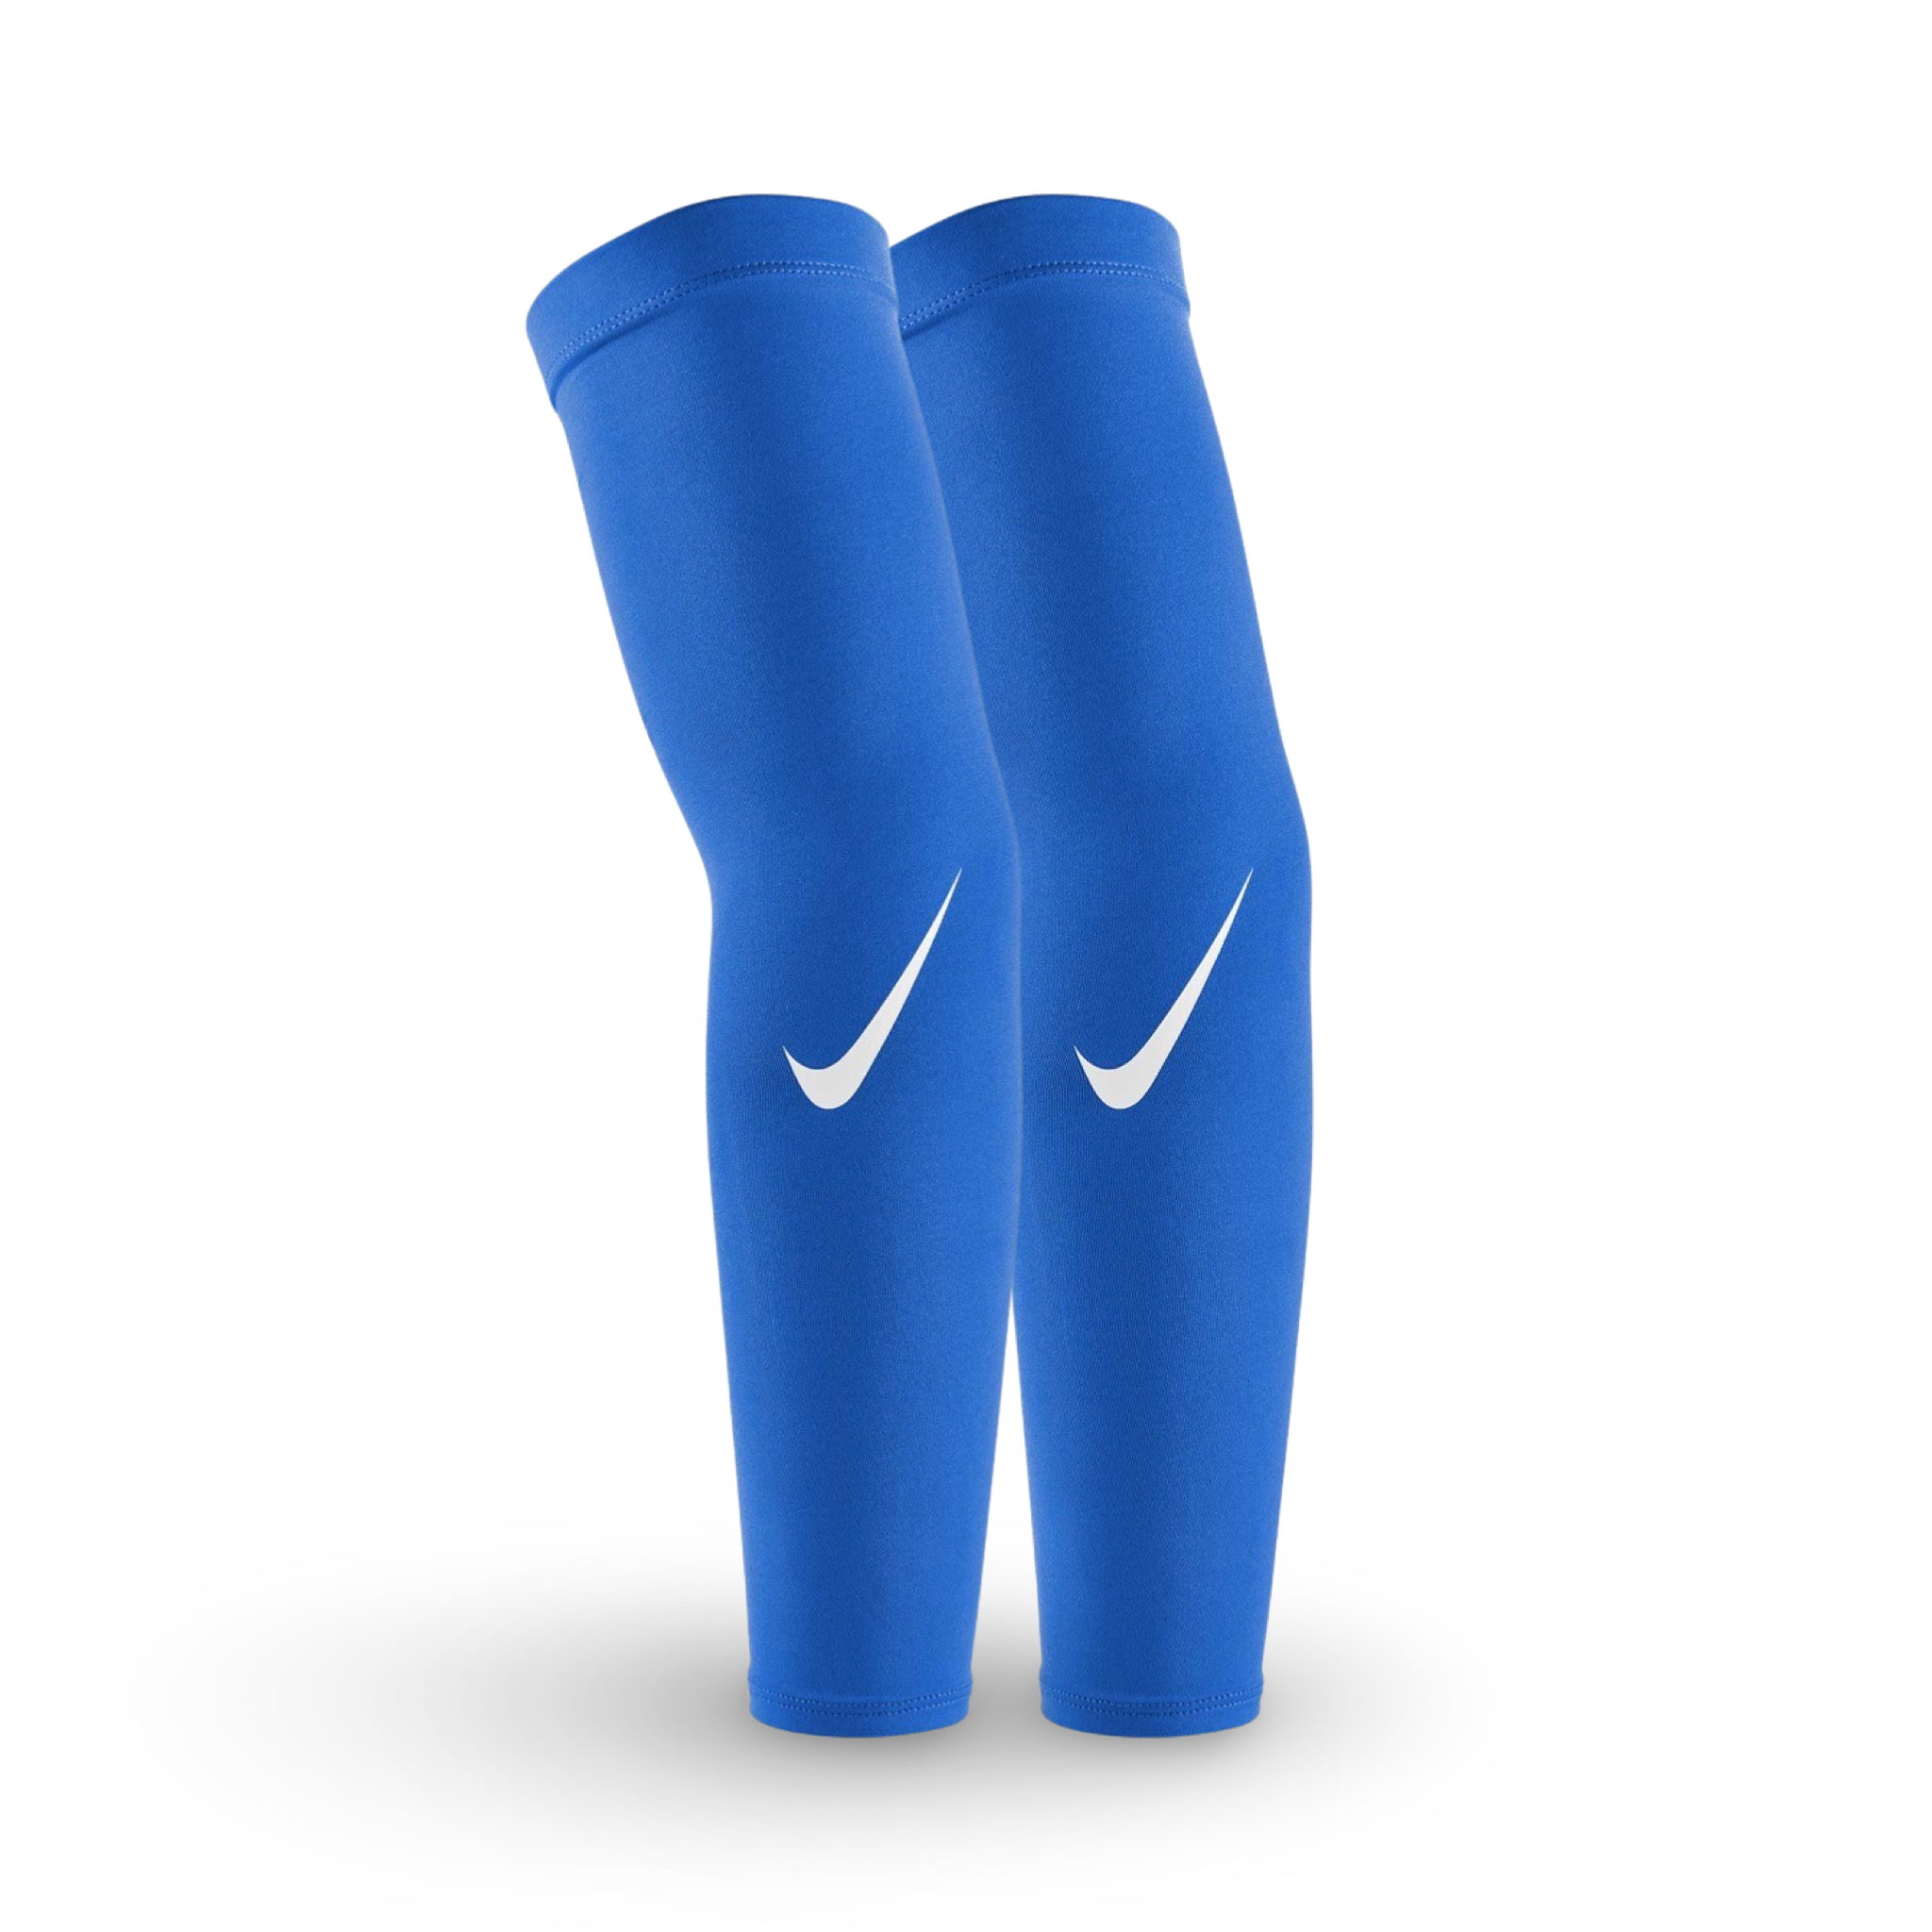 Nike Pro Dri-fit Arm Sleeves 4.0 - Adult & Youth